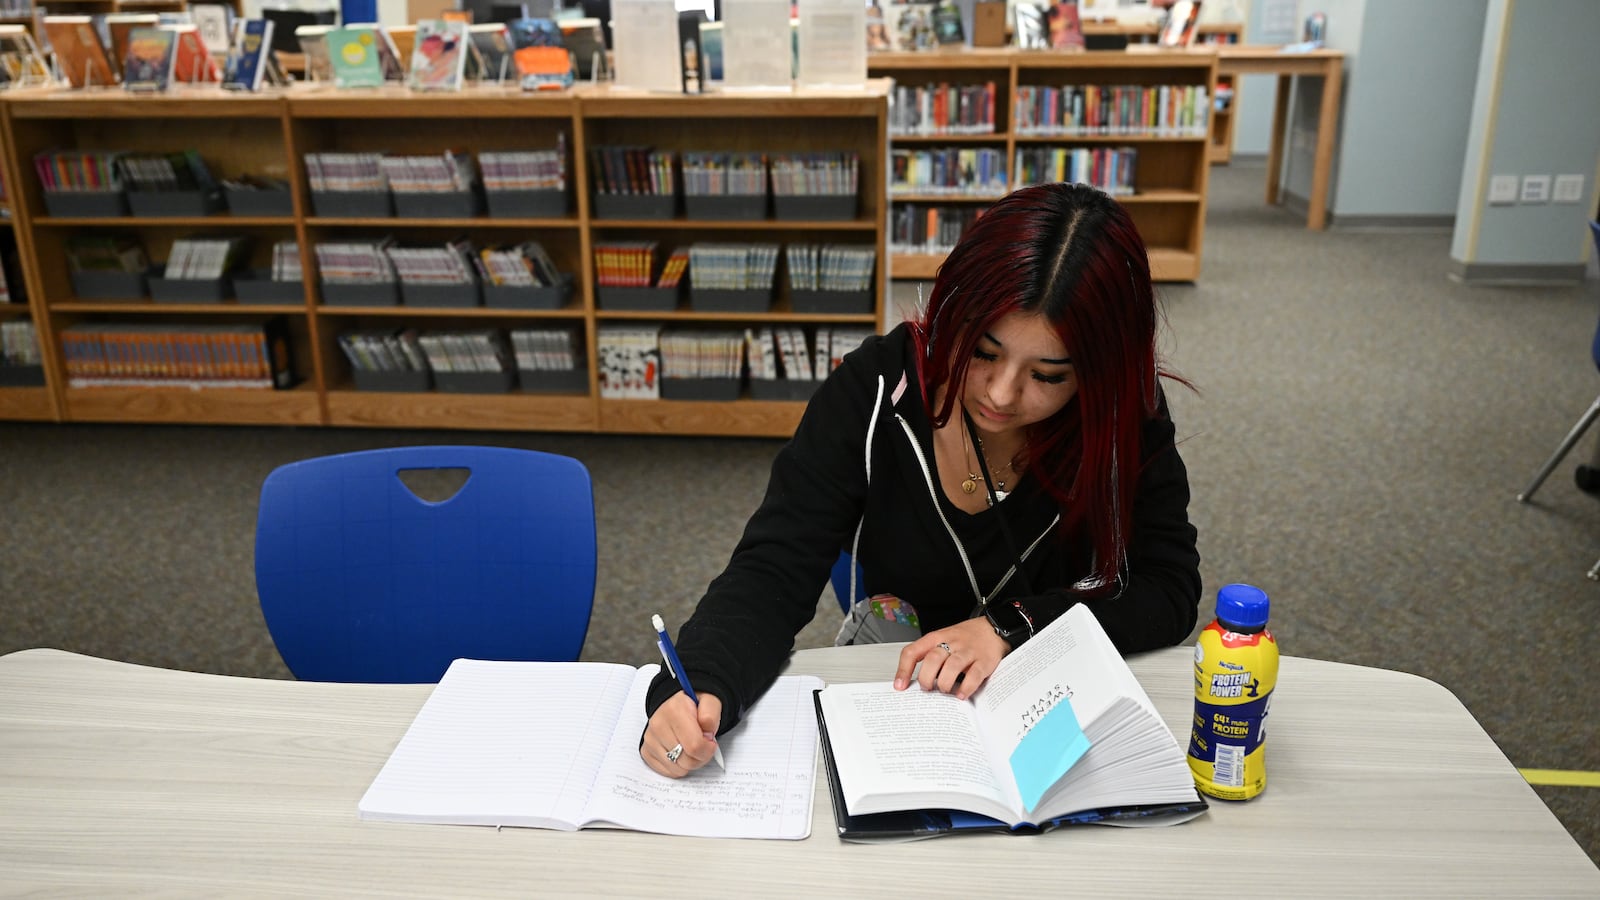 A high school student works on school work with bookshelves in the background.